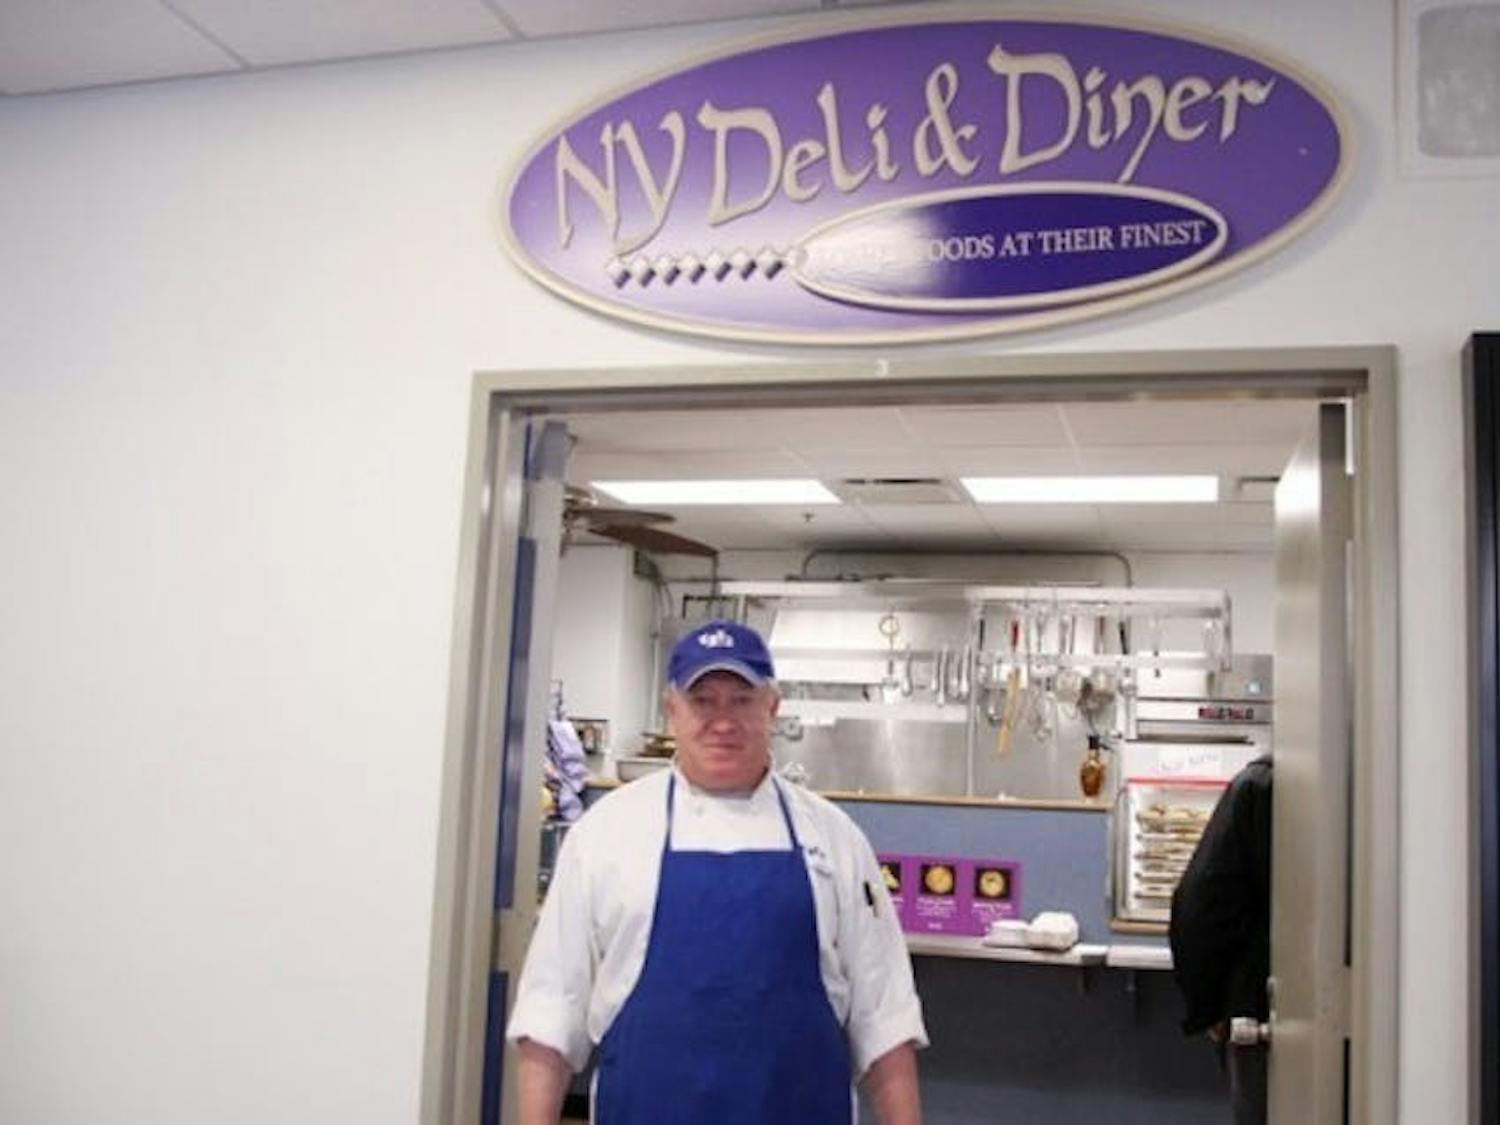 The NY Deli &amp; Diner in Talbert Hall, UB's only all-kosher eatery, reopened Monday after a three-year hiatus.&nbsp;